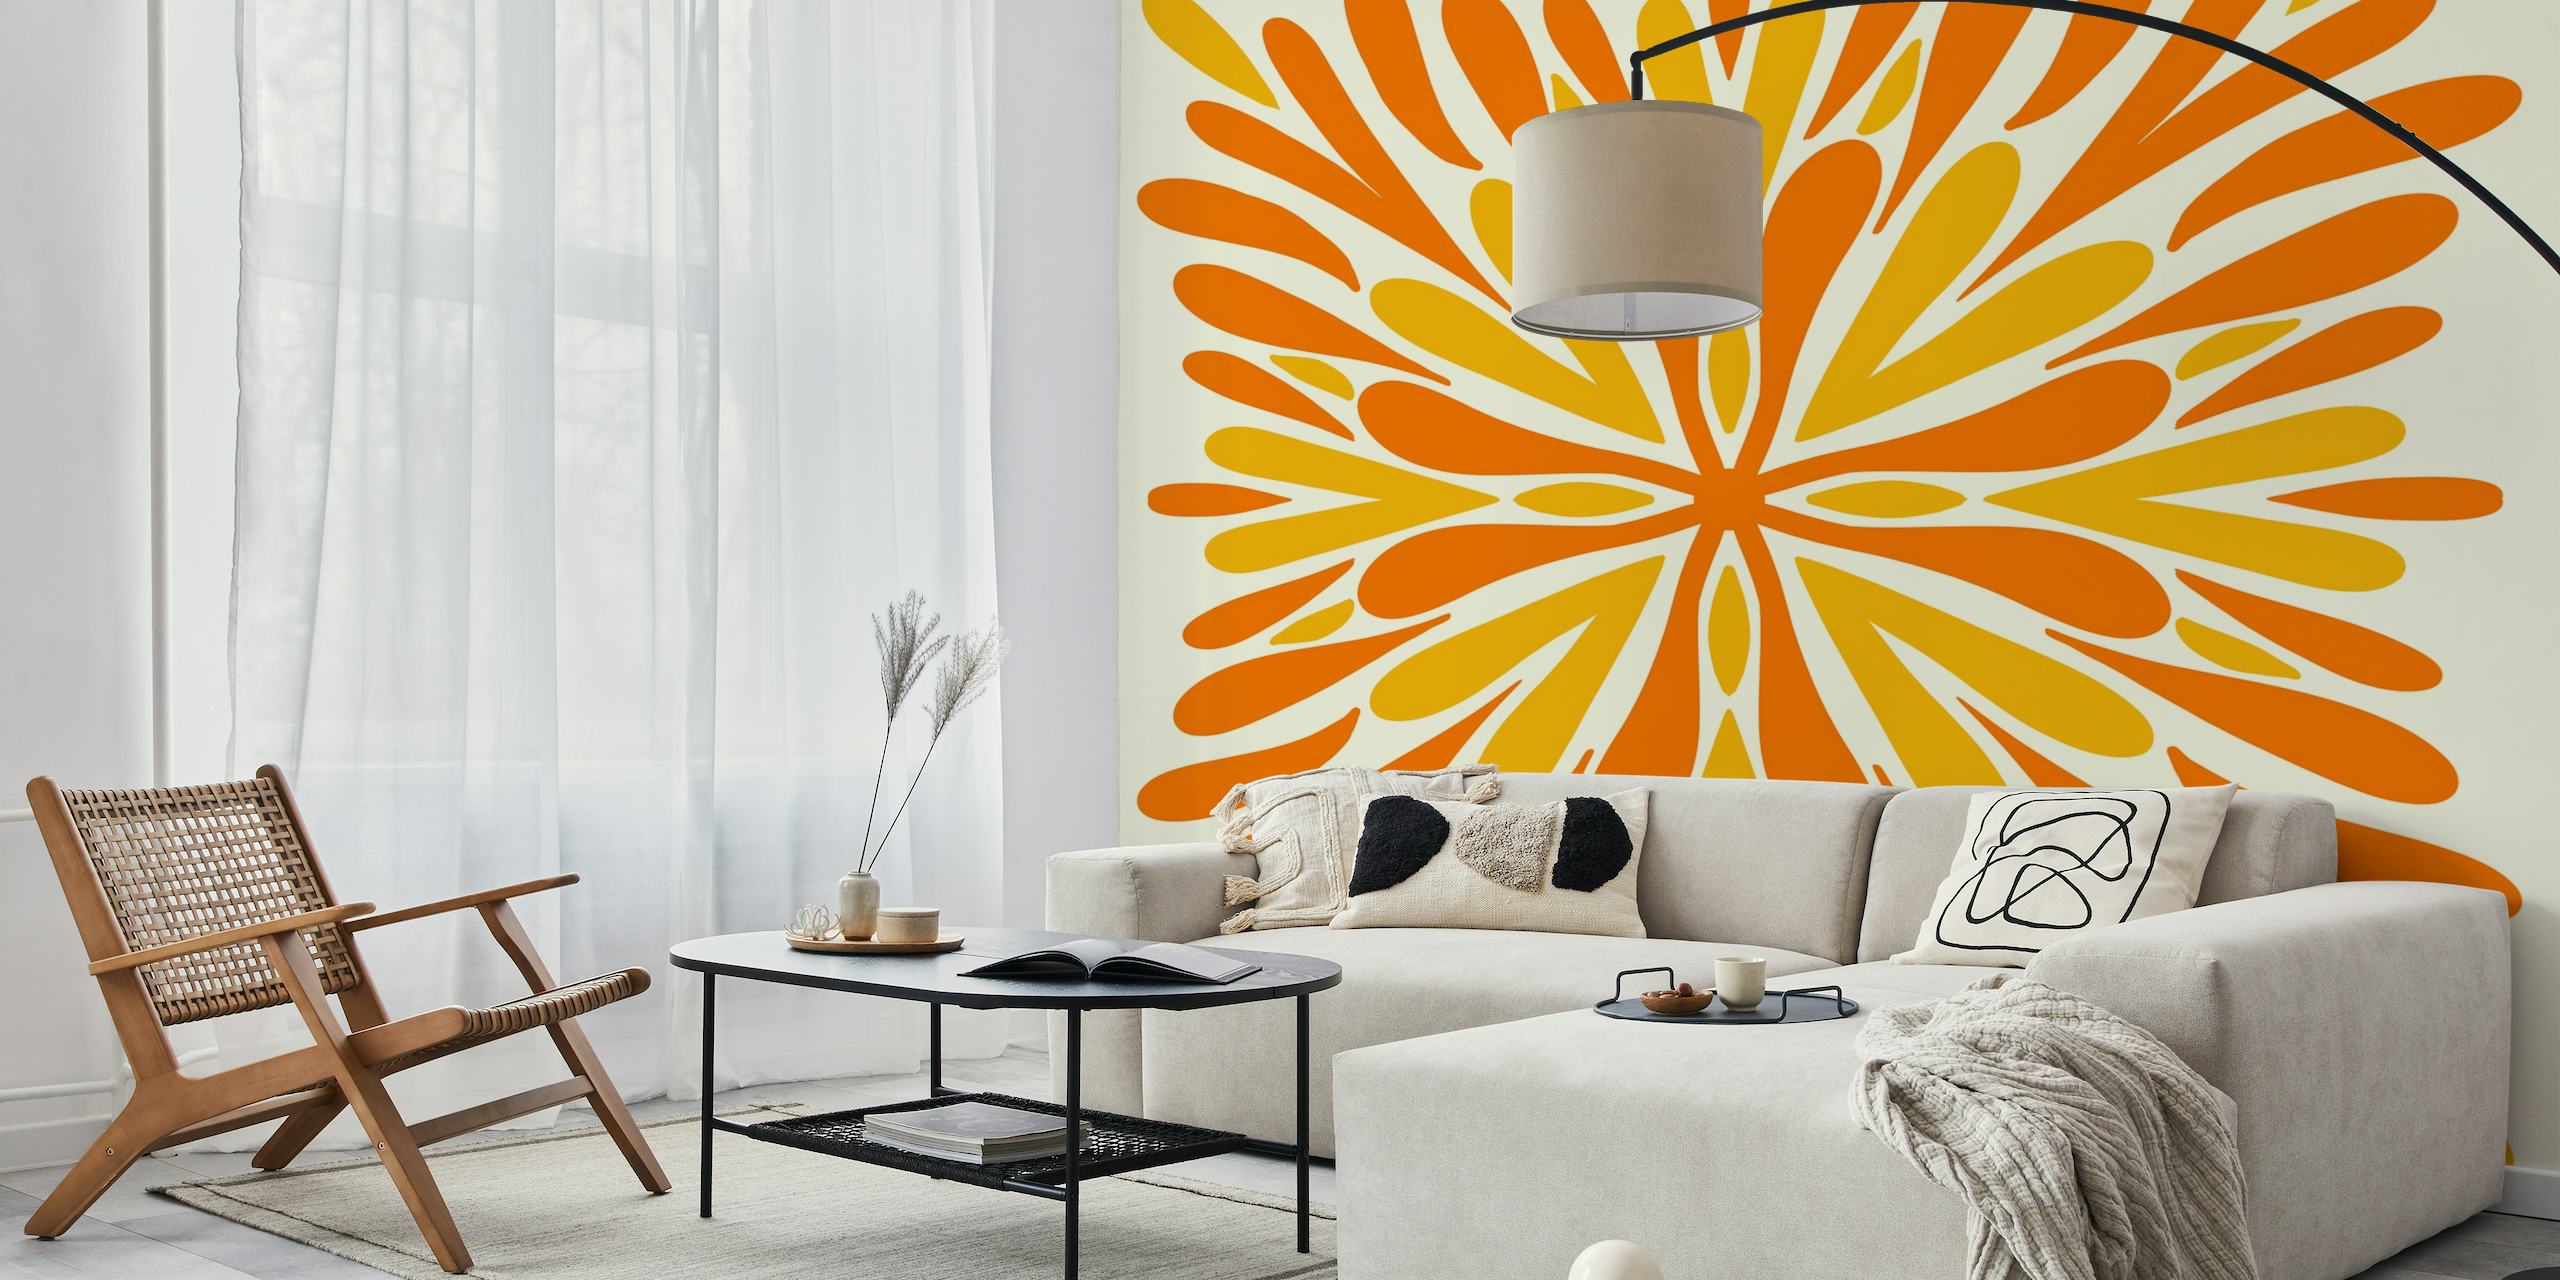 Abstract modern symmetry petals wall mural in orange and yellow